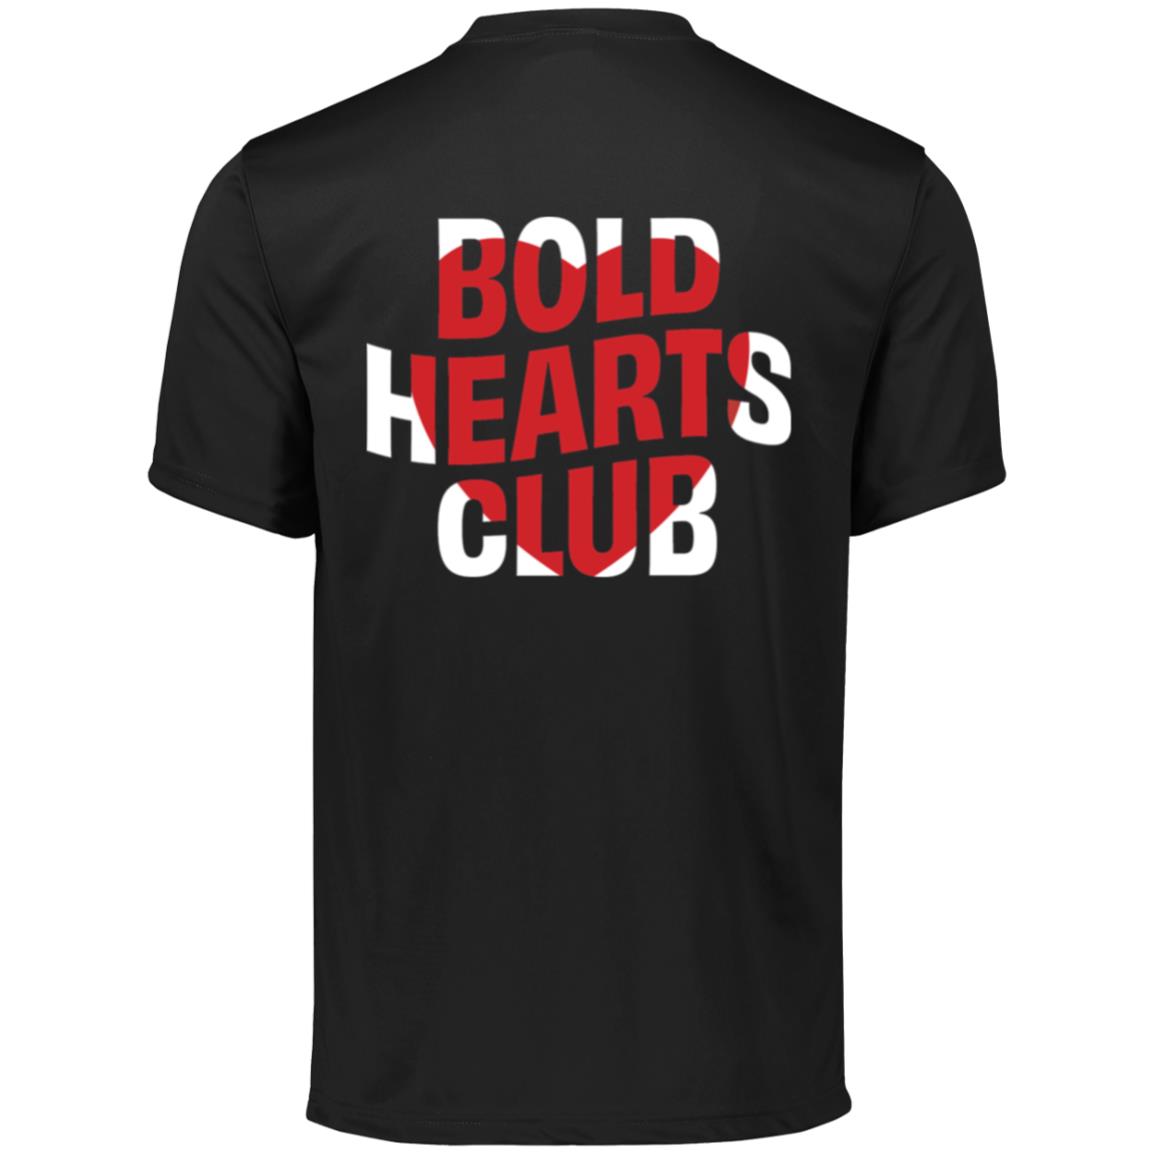 black short sleeve tshirt with a red heart and words "Bold Hearts Club" printed over it.